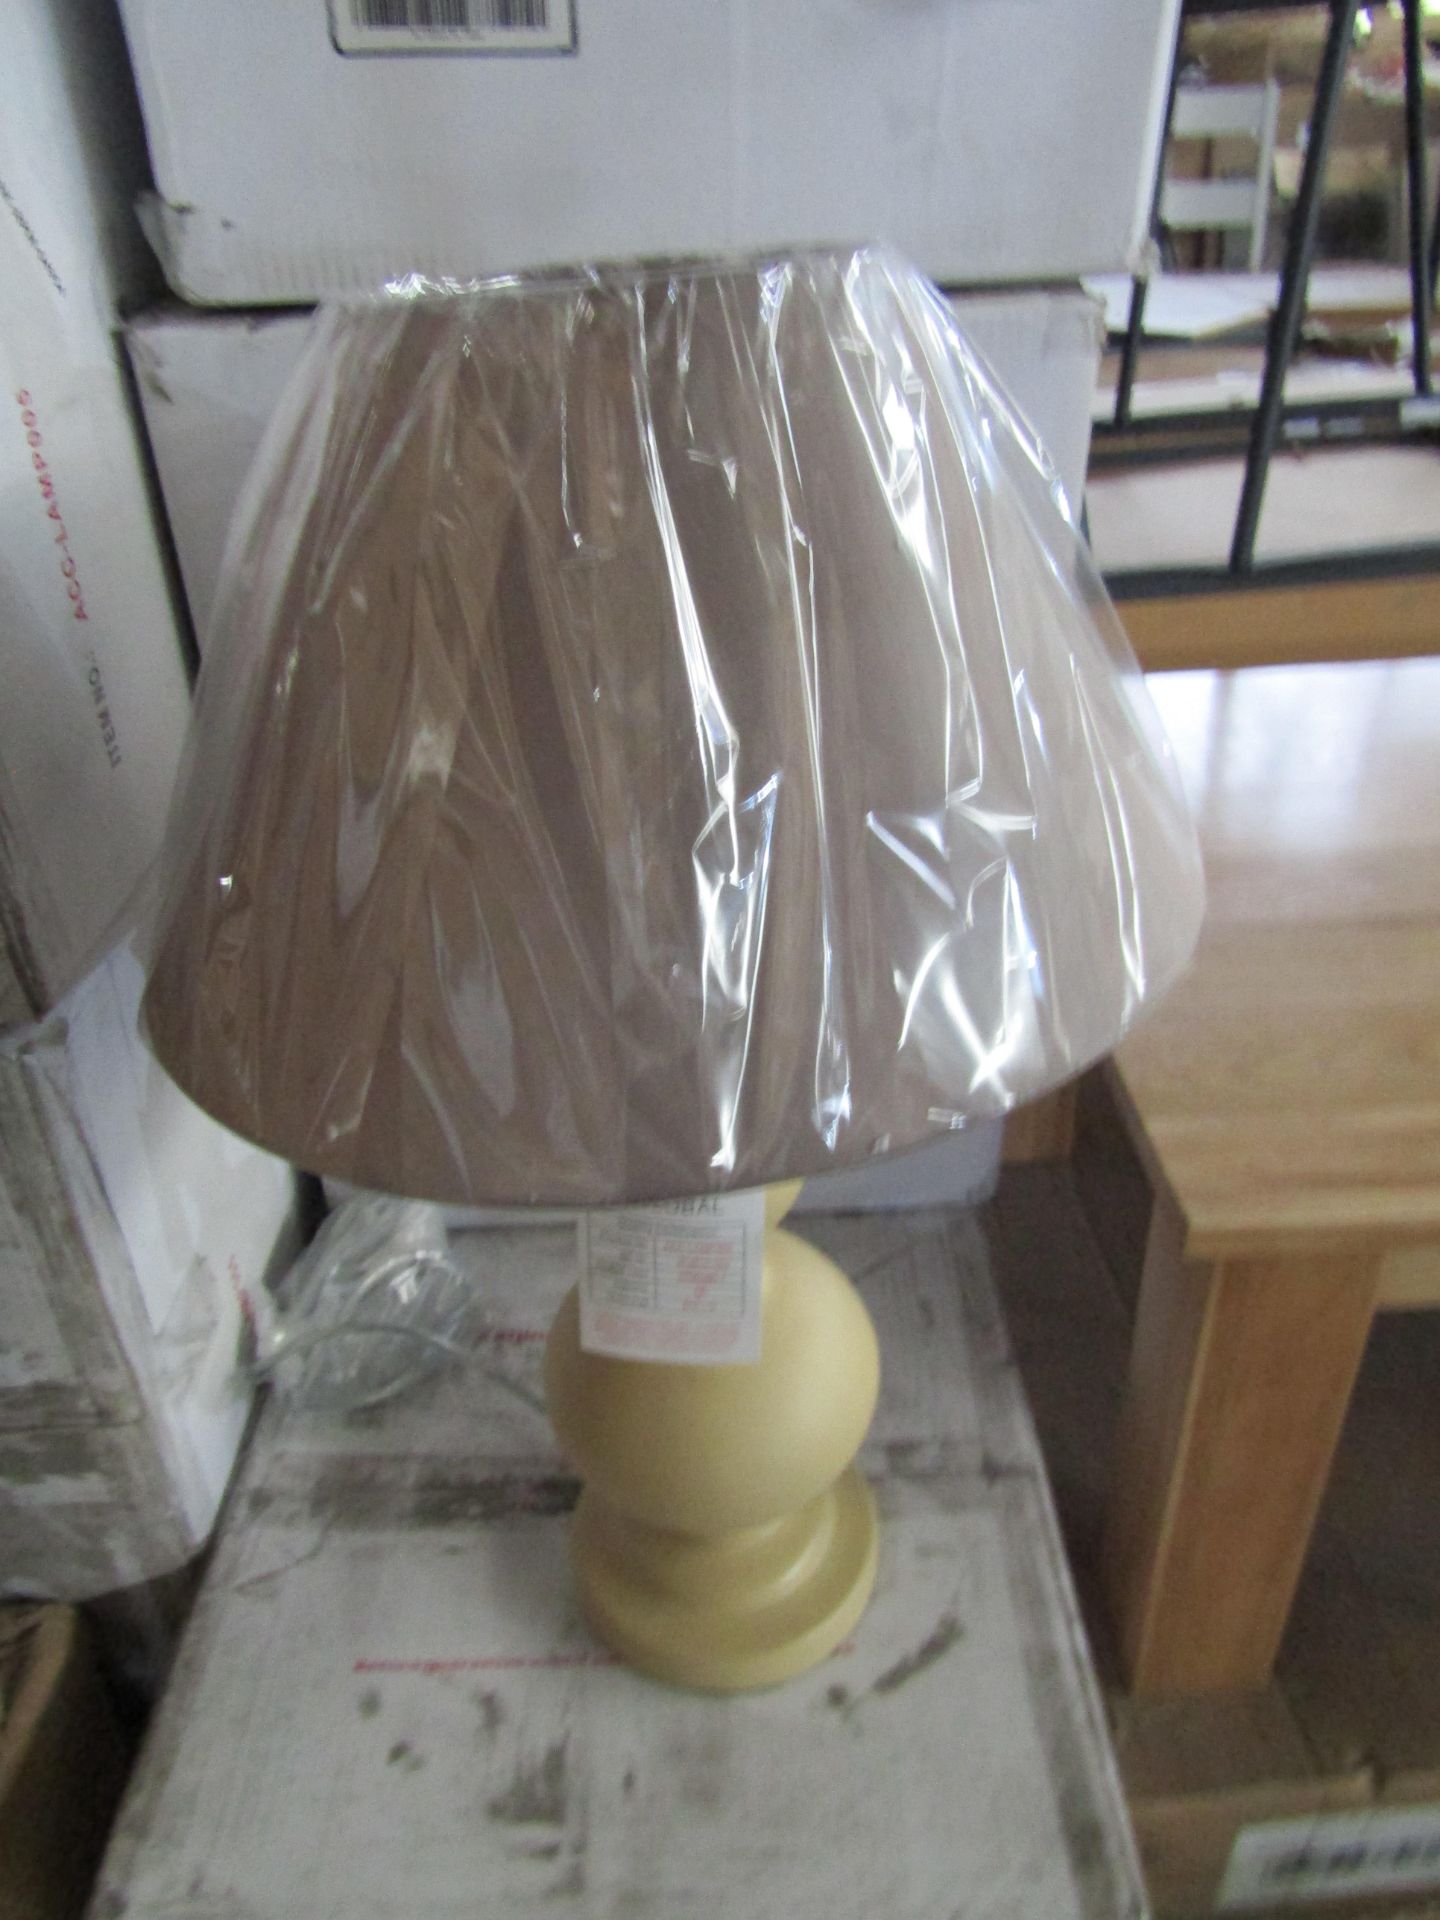 Oak Furnitureland Table Lamp 5 RRP 149.00 Making the most of light, This lamp features sphere-